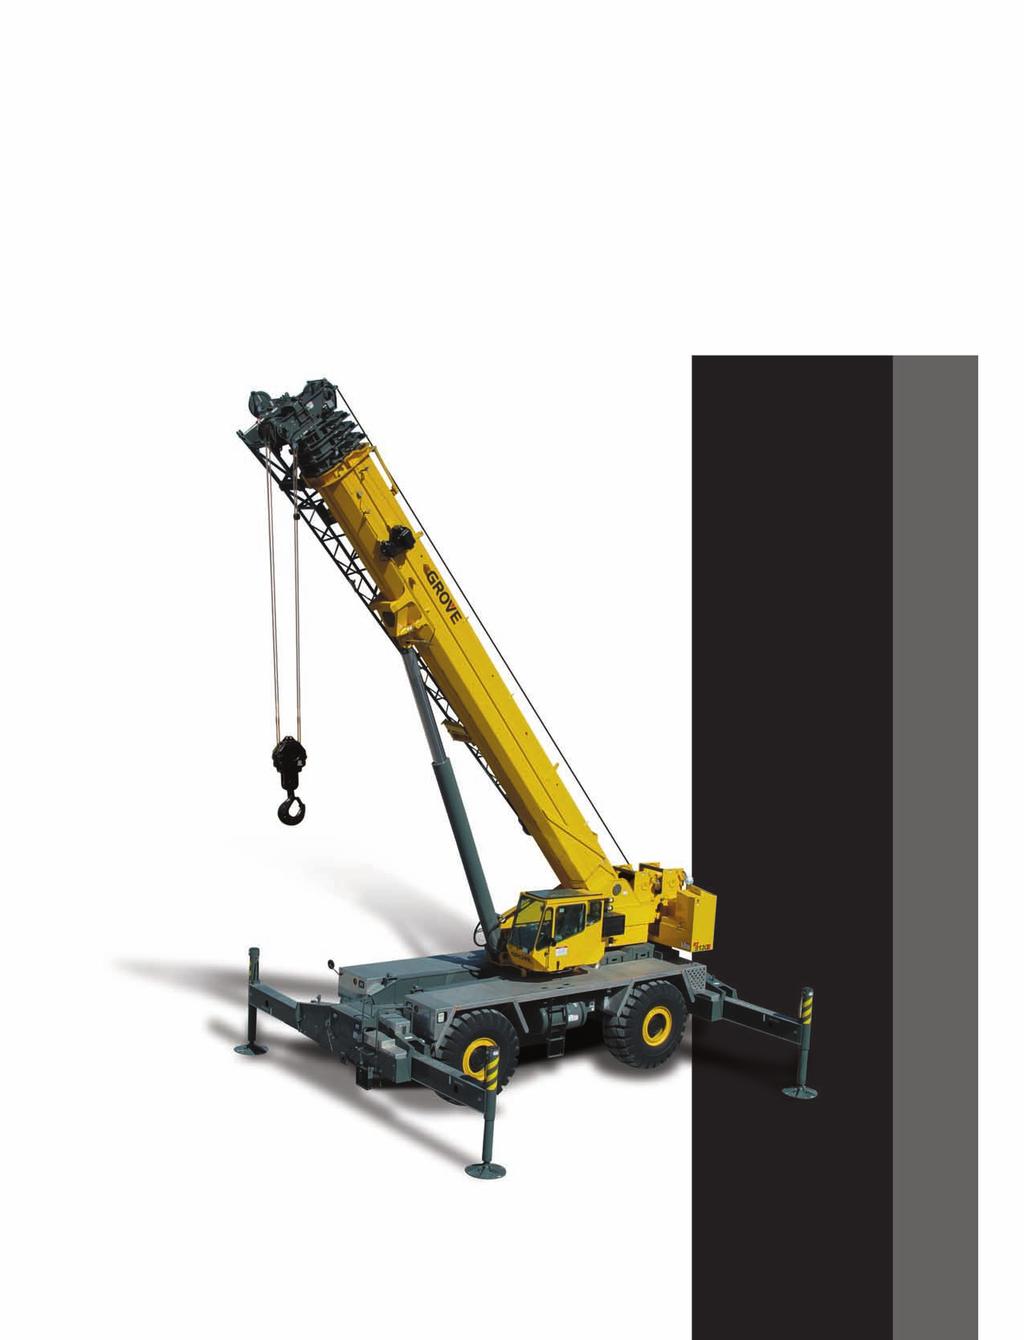 product guide features ton (120 mt) capacity 42-160 ft. (12.8-48.8 m) 5-section, full power boom 36-59 ft (11-18 m) offsettable bi-fold swingaway extension 26 ft.